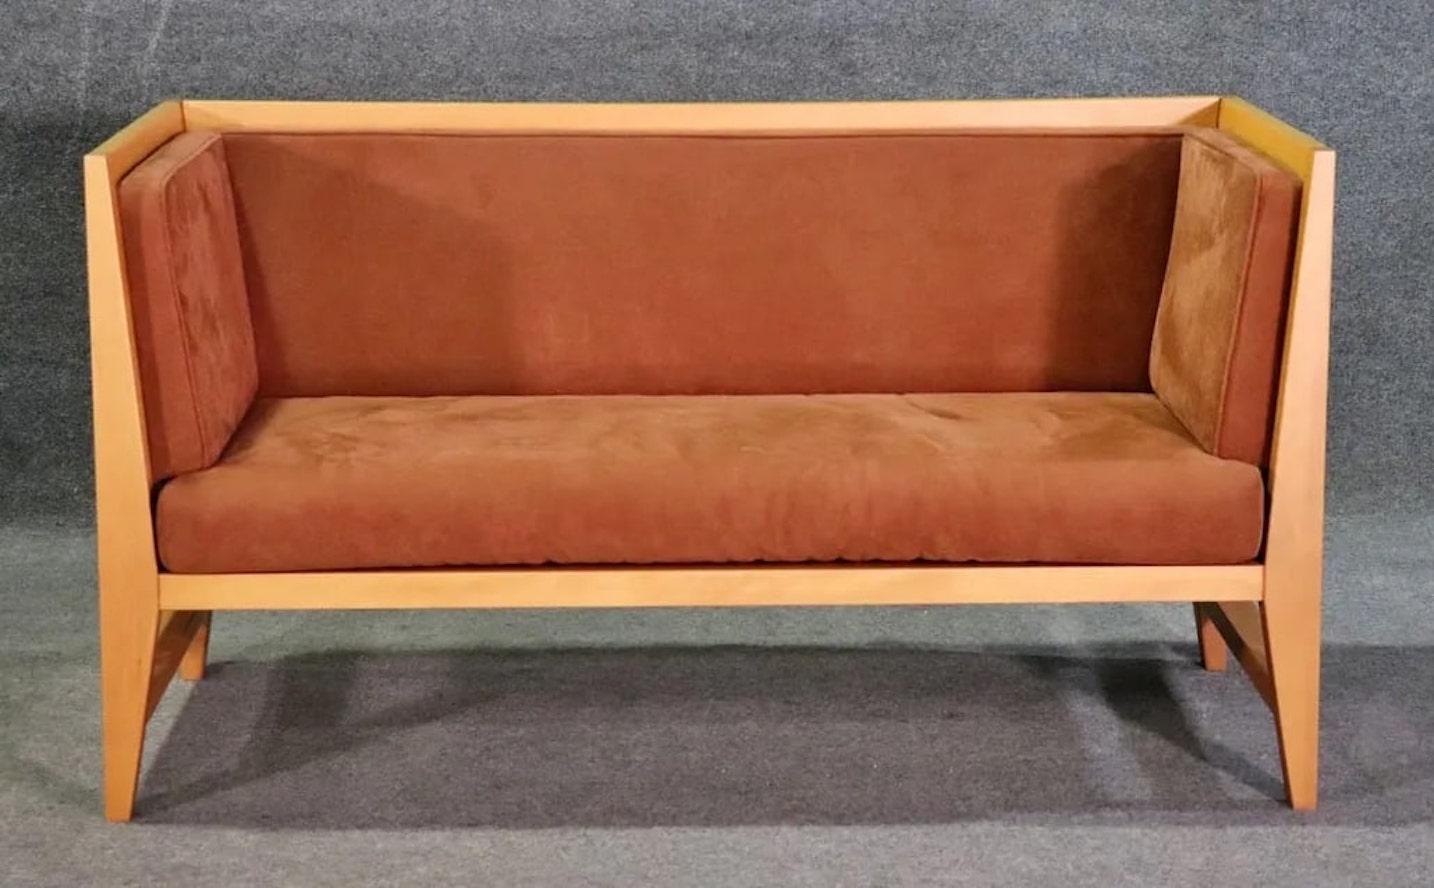 Modern style loveseat by Casa Nova. Suede upholstered on all three sides with blonde wood frame.
Please confirm location NY or NJ